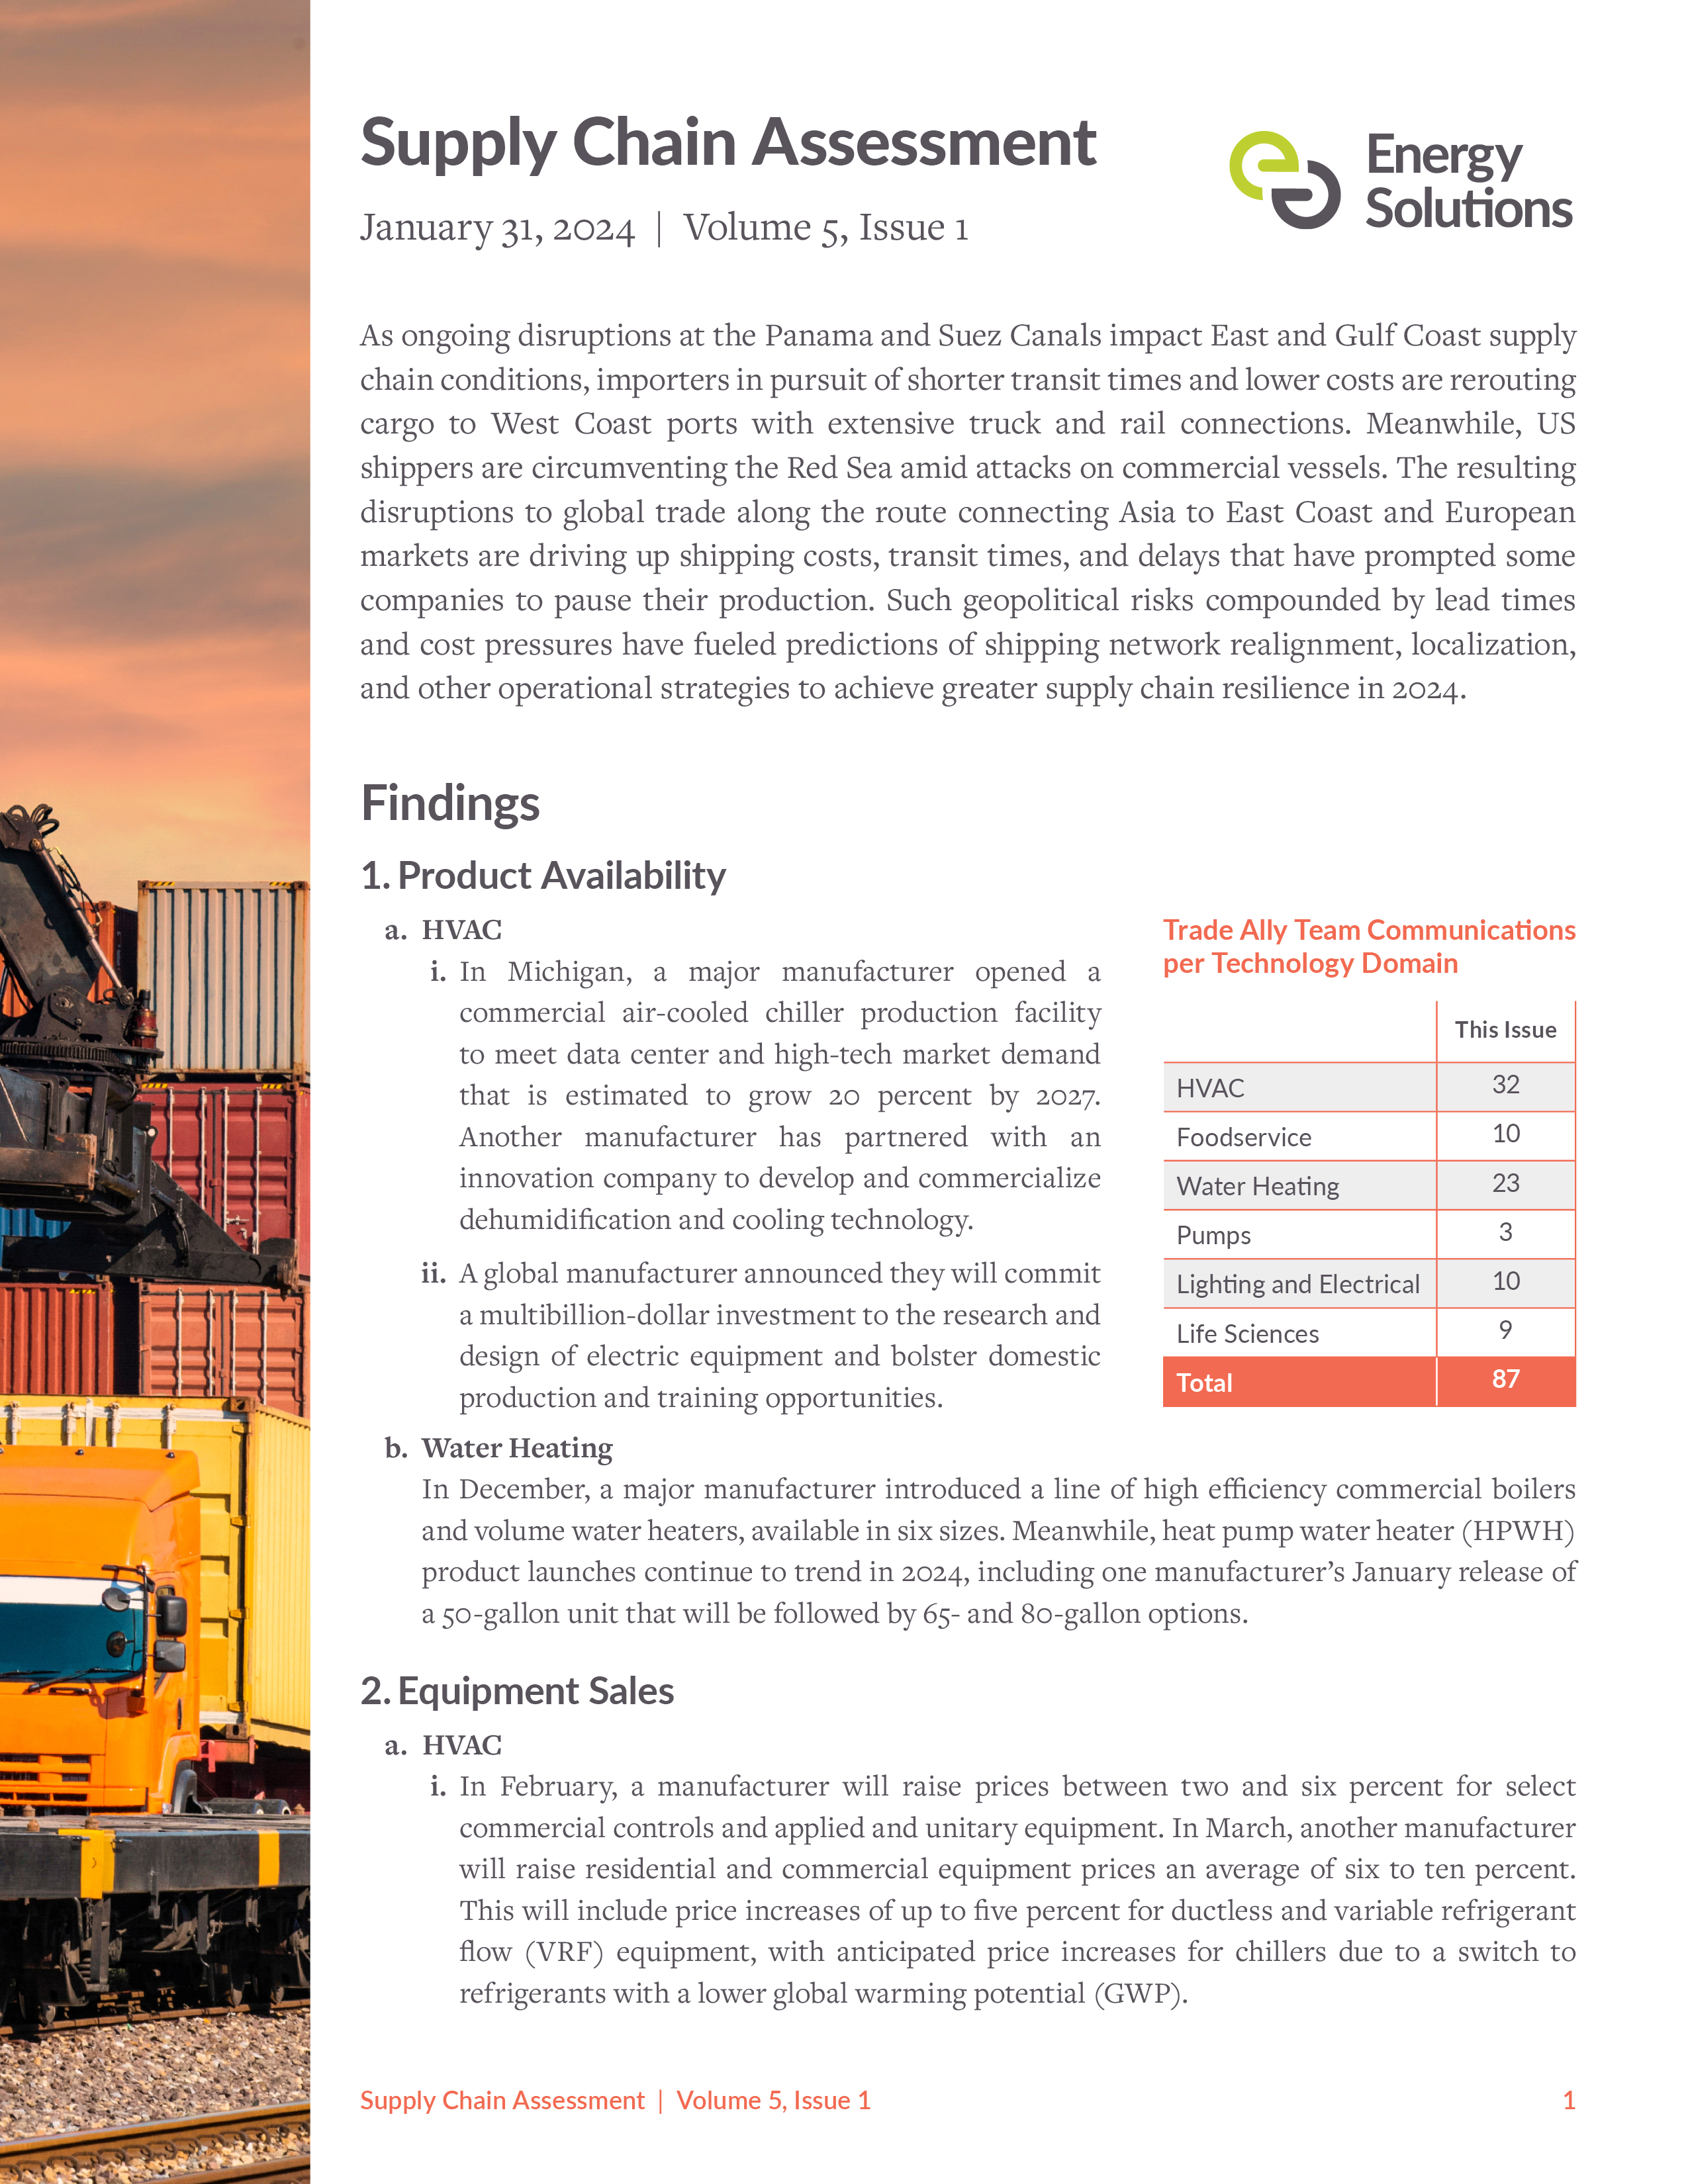 Supply Chain Assessment Vol 5 Issue 1